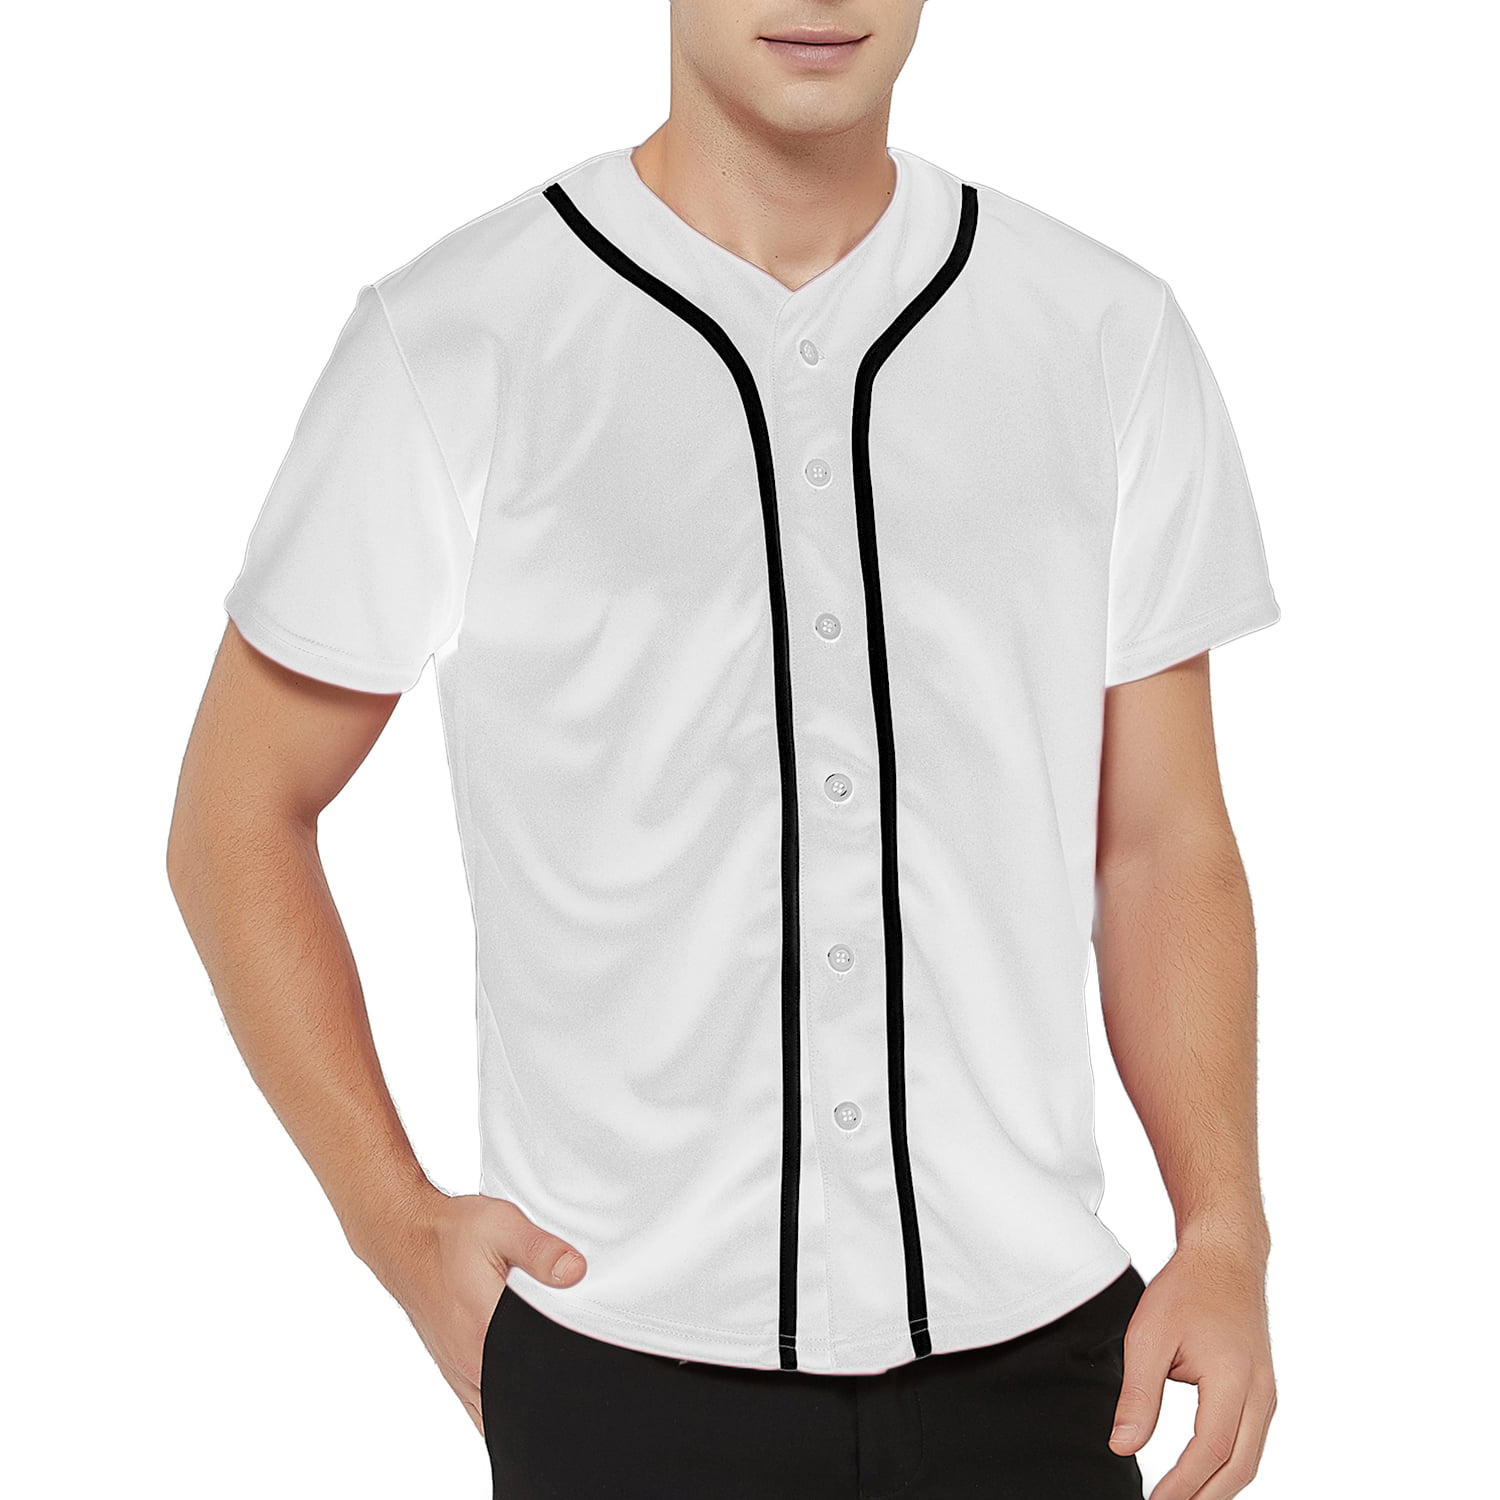 Ma Croix Mens Team Sports Printable Blank Jersey Baseball Collar Button Up T Shirts, Men's, Size: 3XL, White